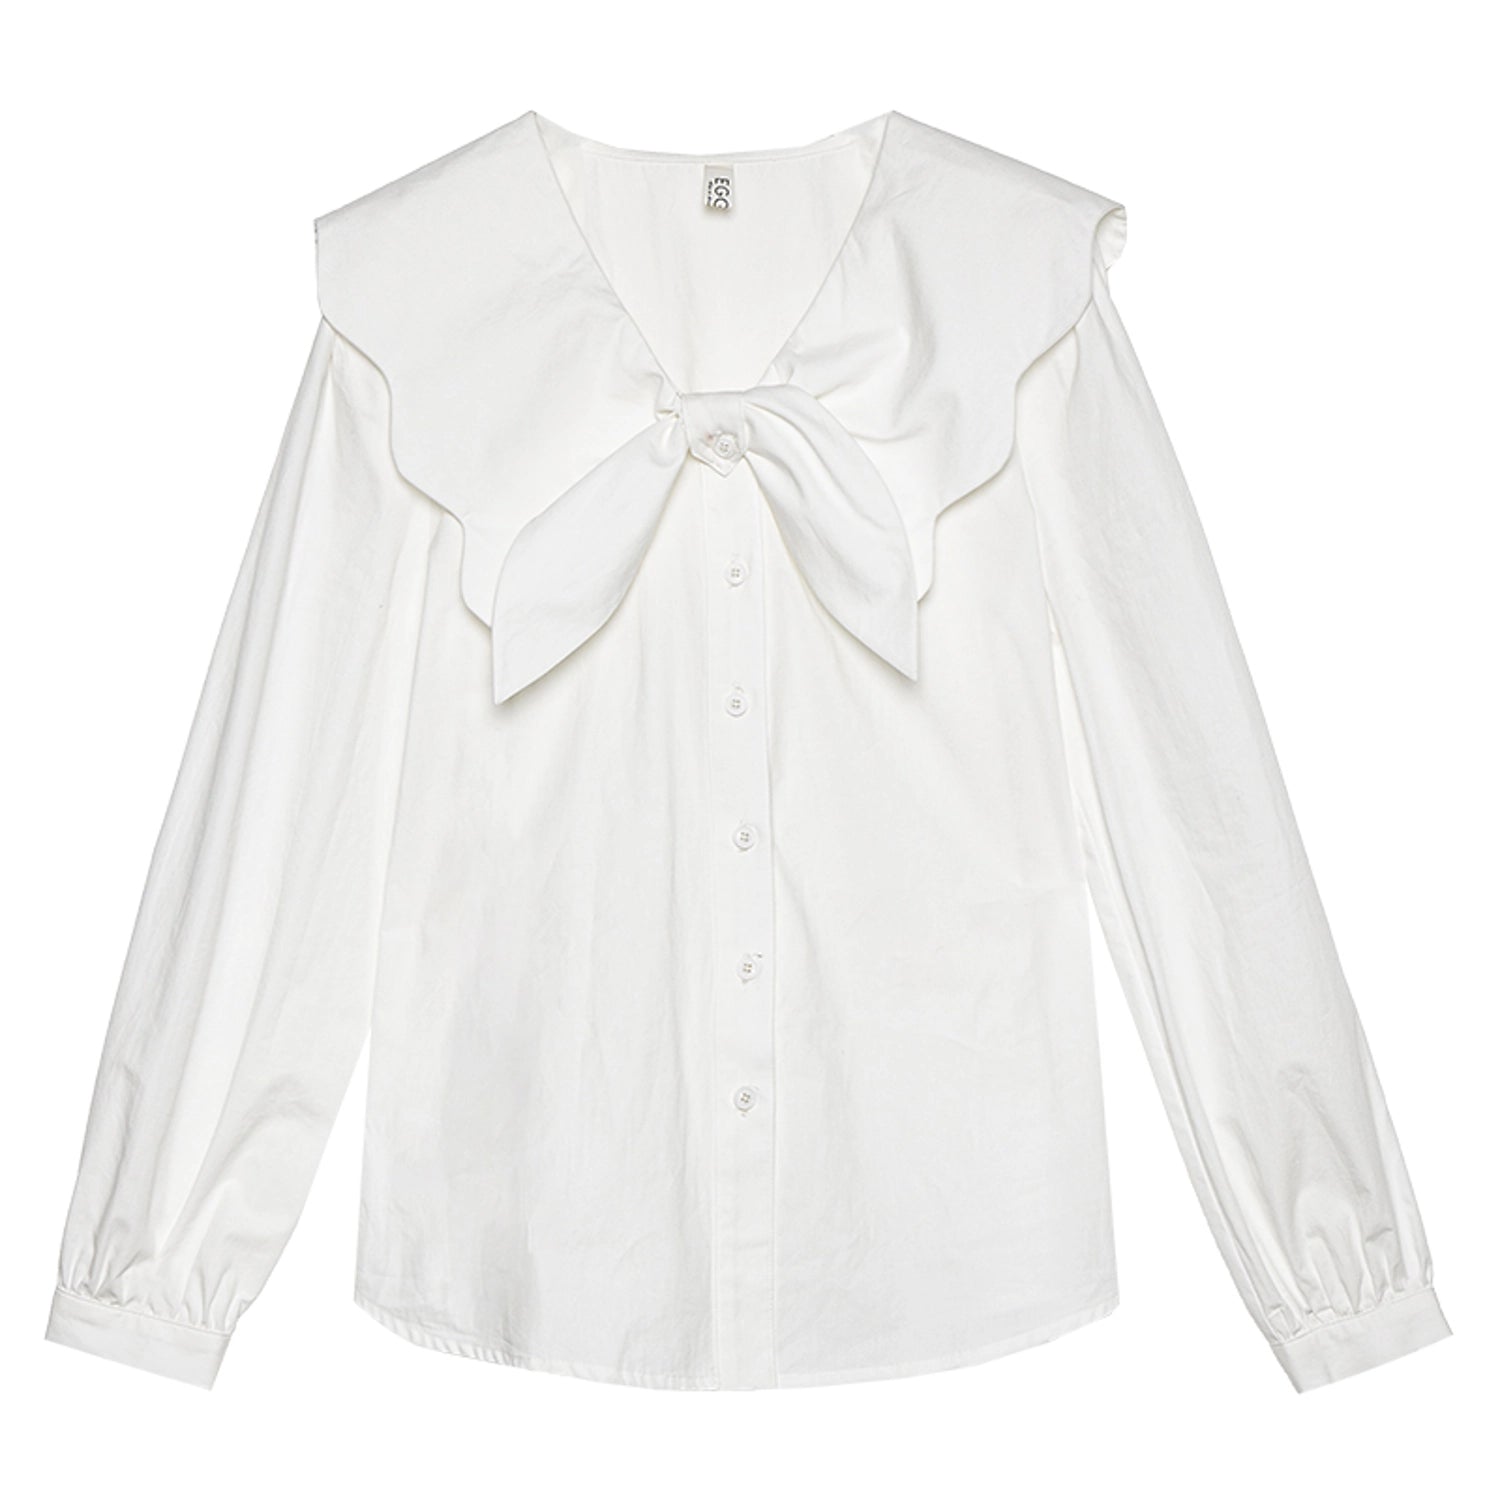 Women's Chic Bow Tie Neck Blouse Featuring Long Sleeves